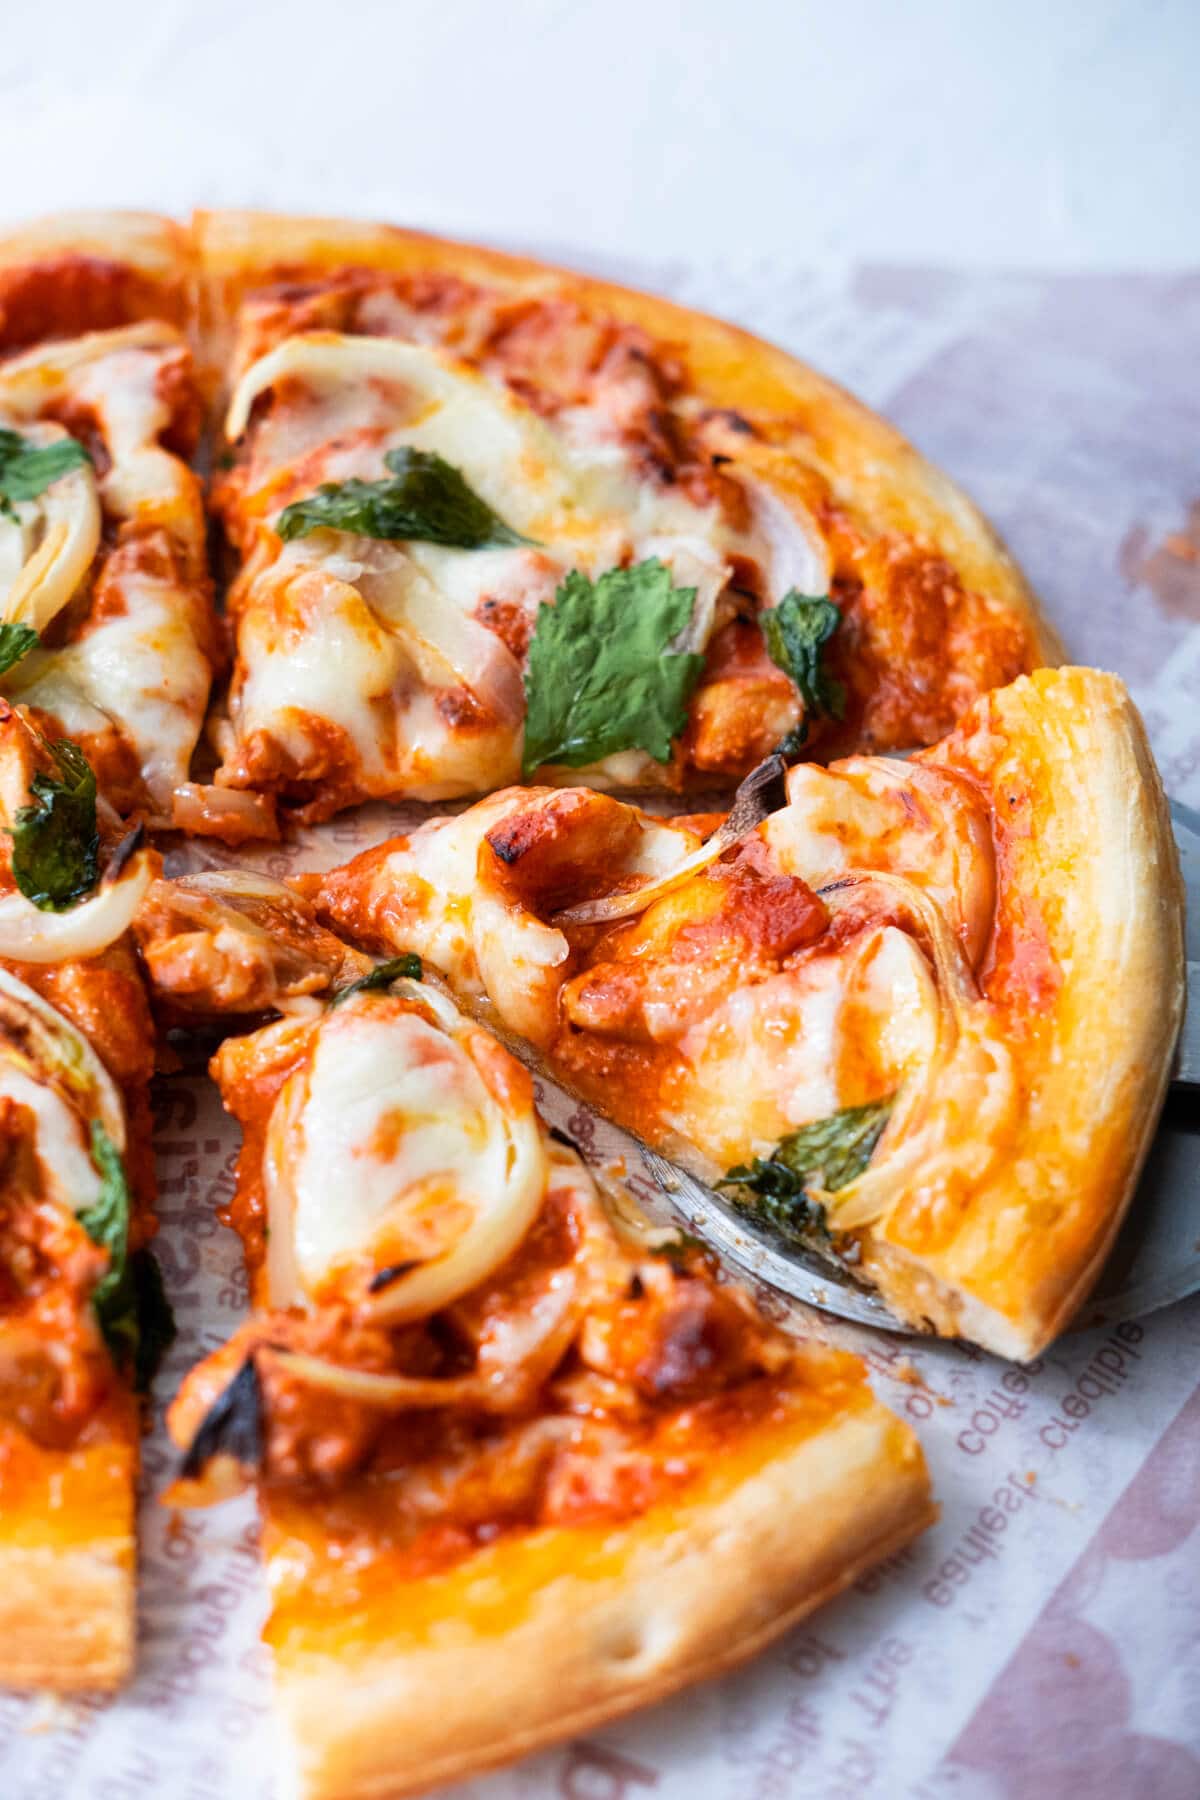 Easy and delicious homemade Indian pizza with chicken tikka masala as pizza topping. 